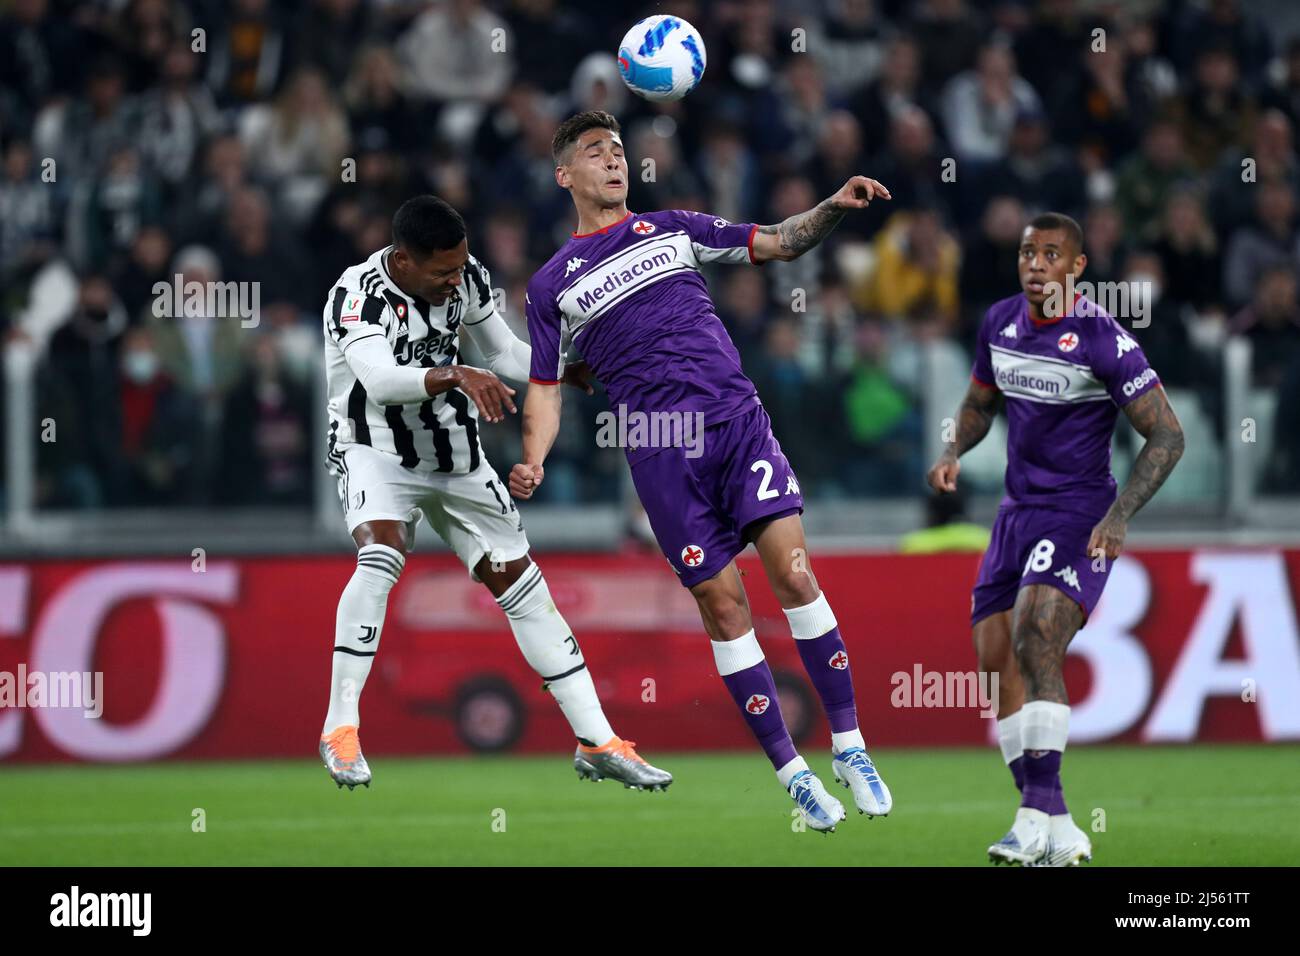 Turin, Italy, April 20, 2022, , Alex Sandro of Juventus Fc  and Lucas Martinez Quarta of Afc Fiorentina battle for the ball during the Coppa Italia semi-final 2nd leg match between Juventus Fc and Acf Fiorentina at Allianz Stadium on April 20, 2022 in Turin, Italy. Stock Photo